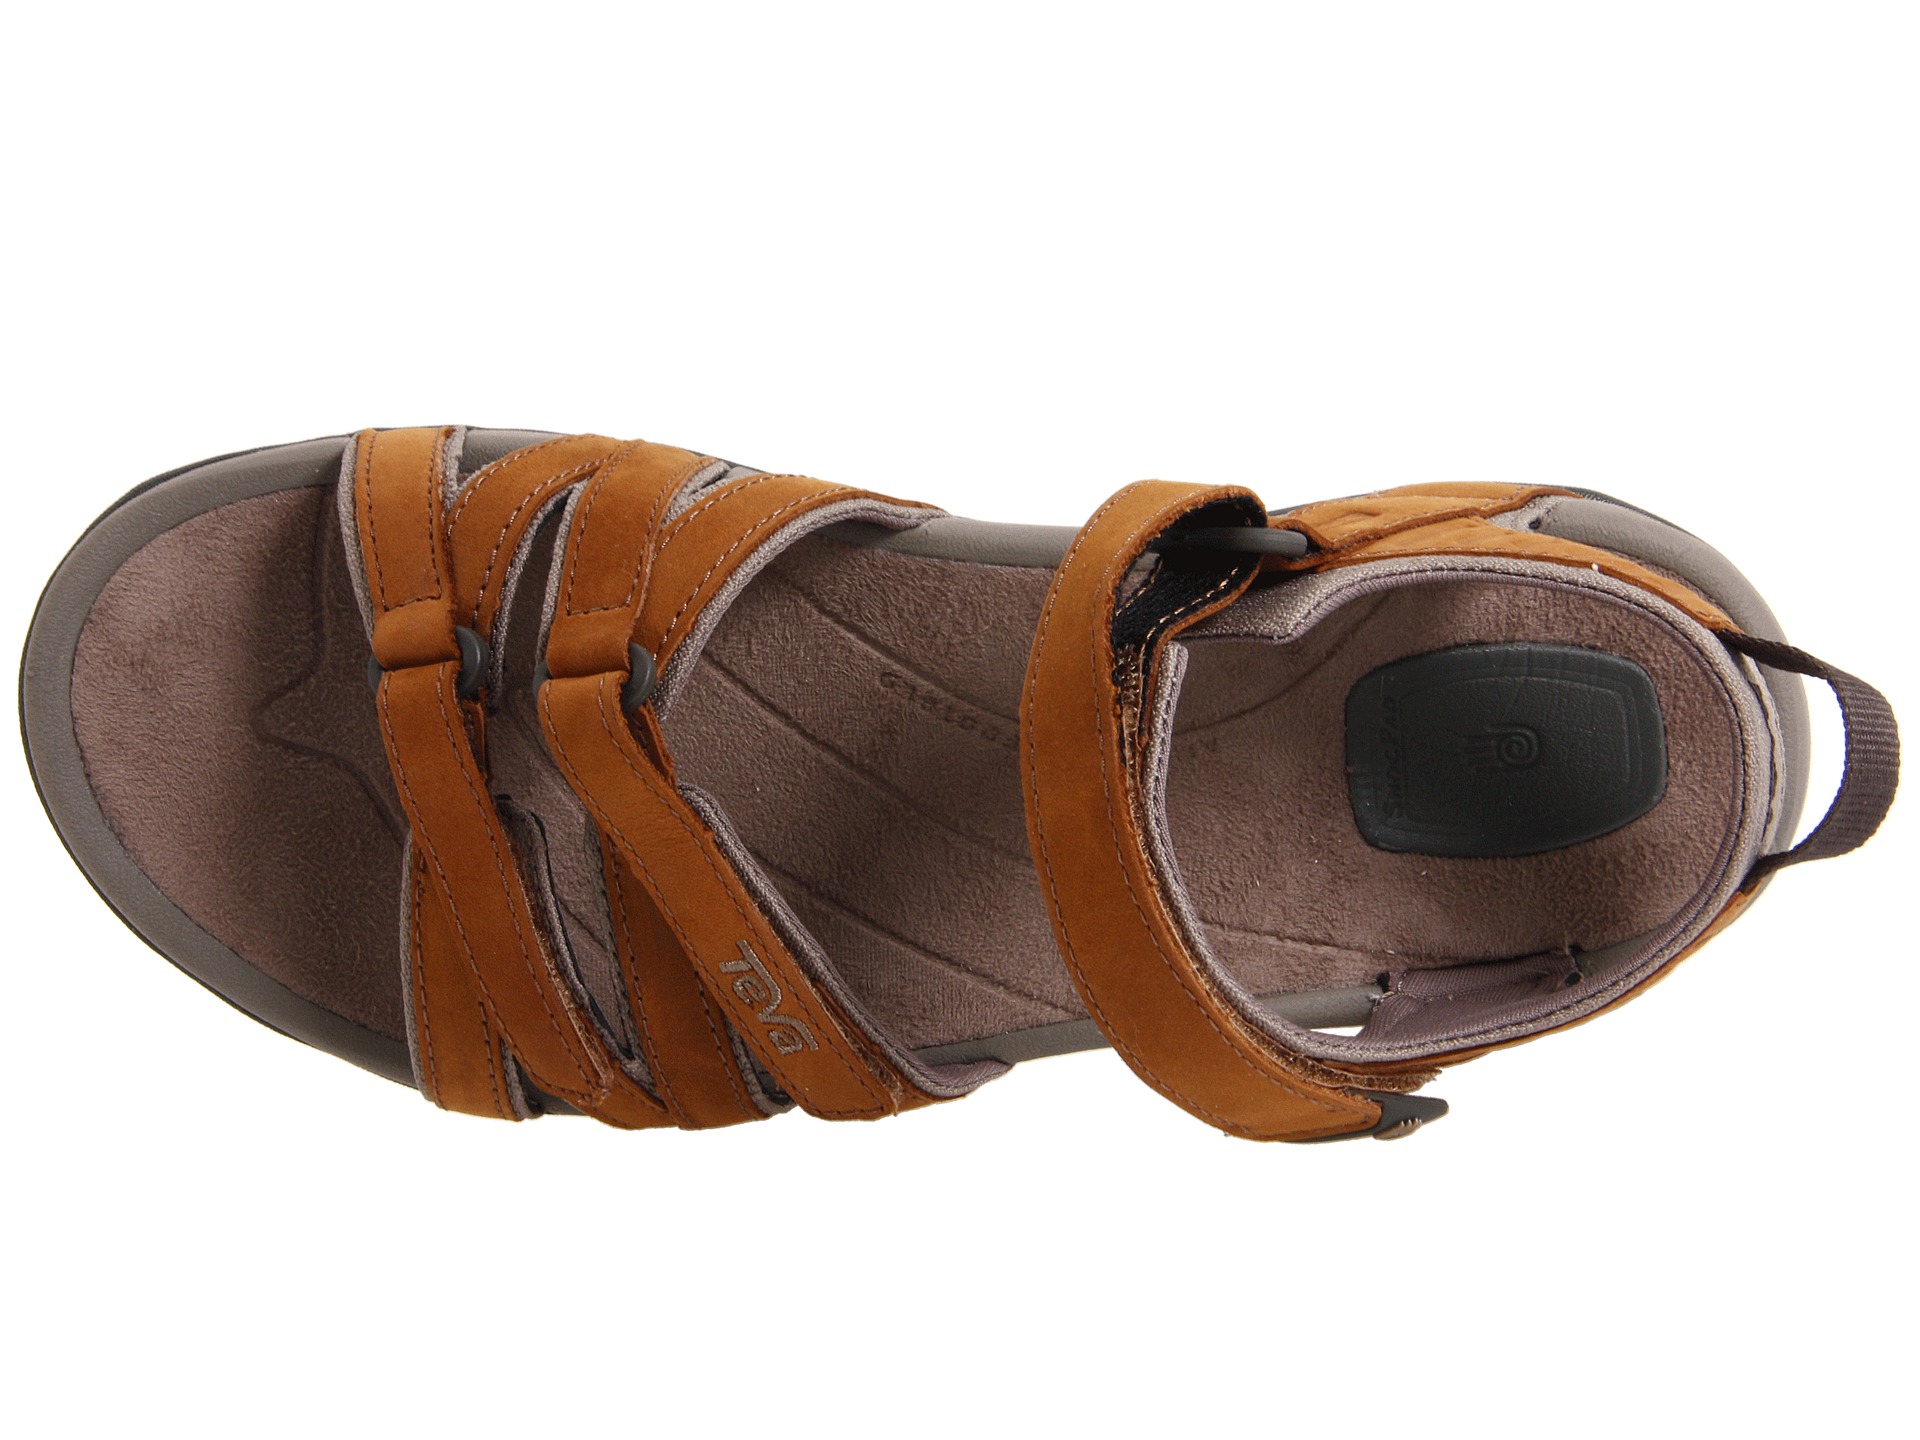 Teva Tirra Leather Rust, Shoes, Girls | Shipped Free at Zappos